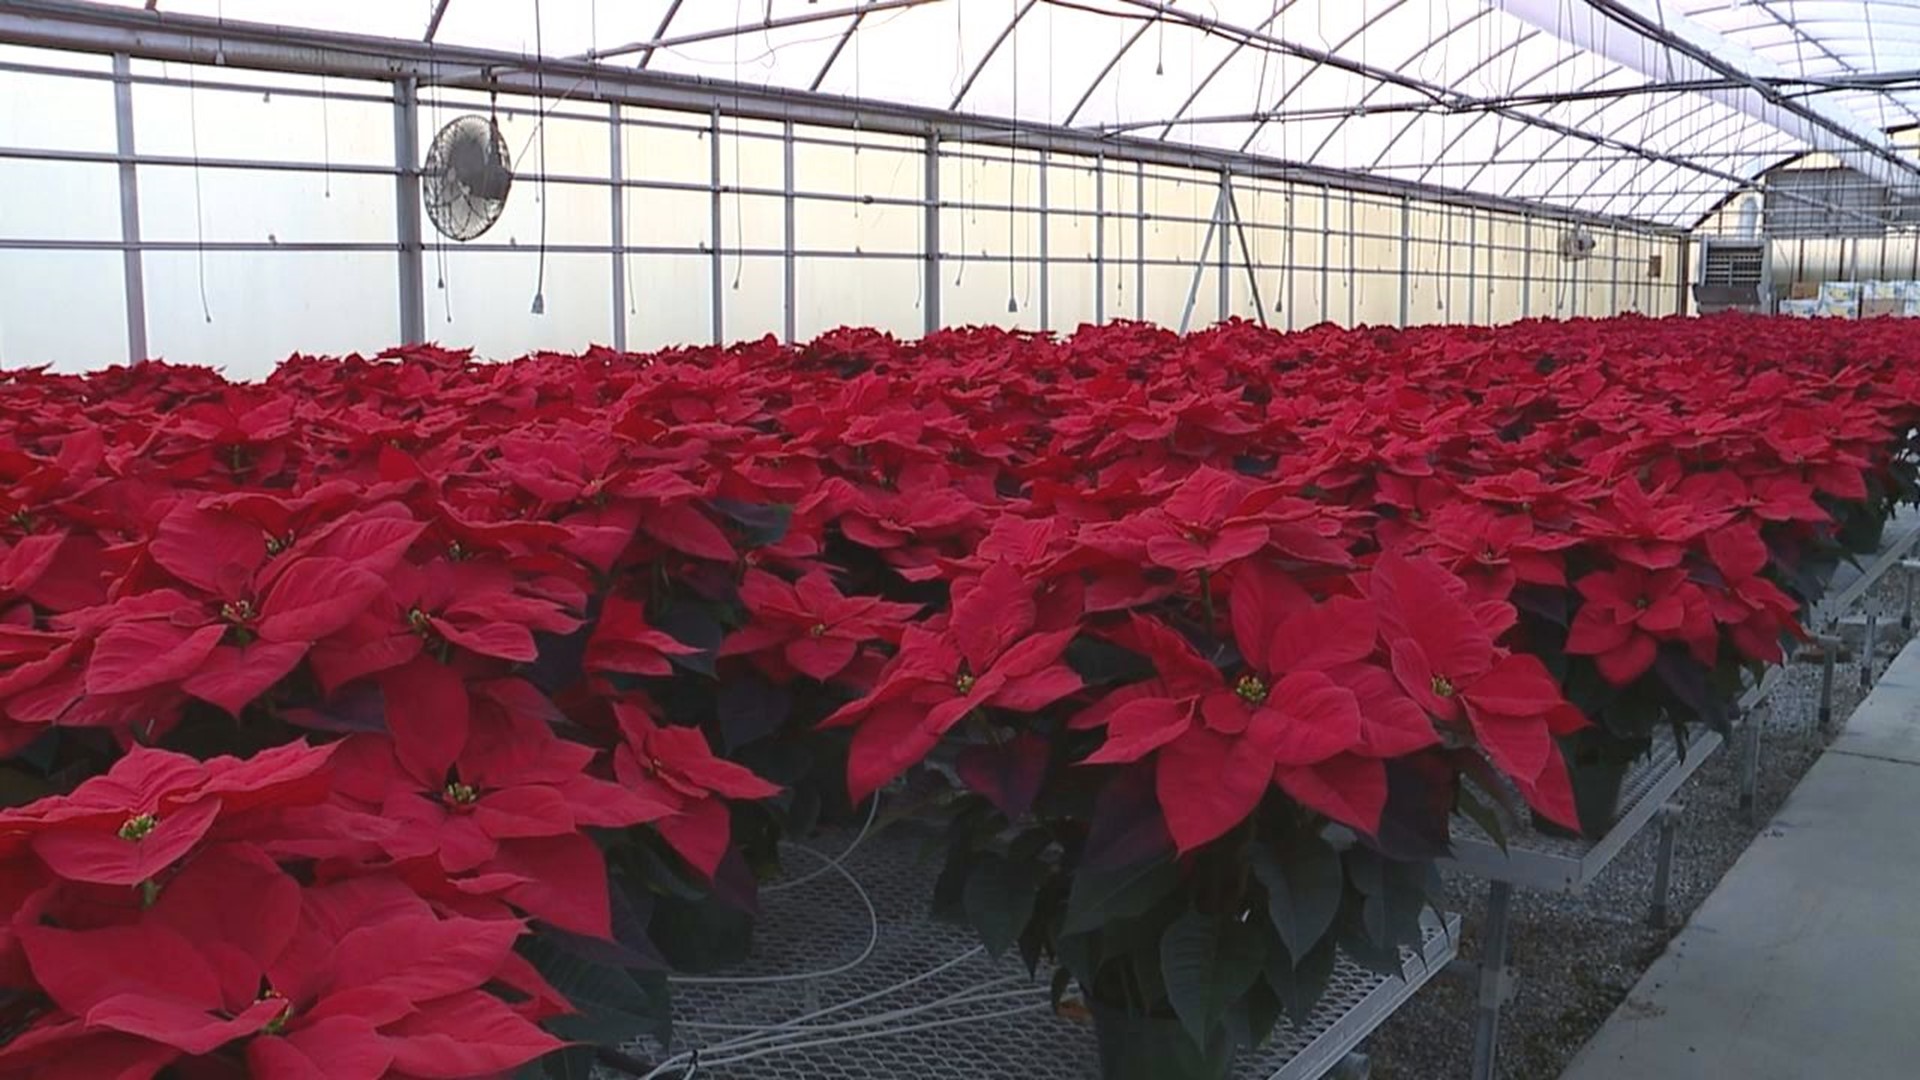 Miller Plant Farm has been growing the popular holiday flower for more than 40 years.